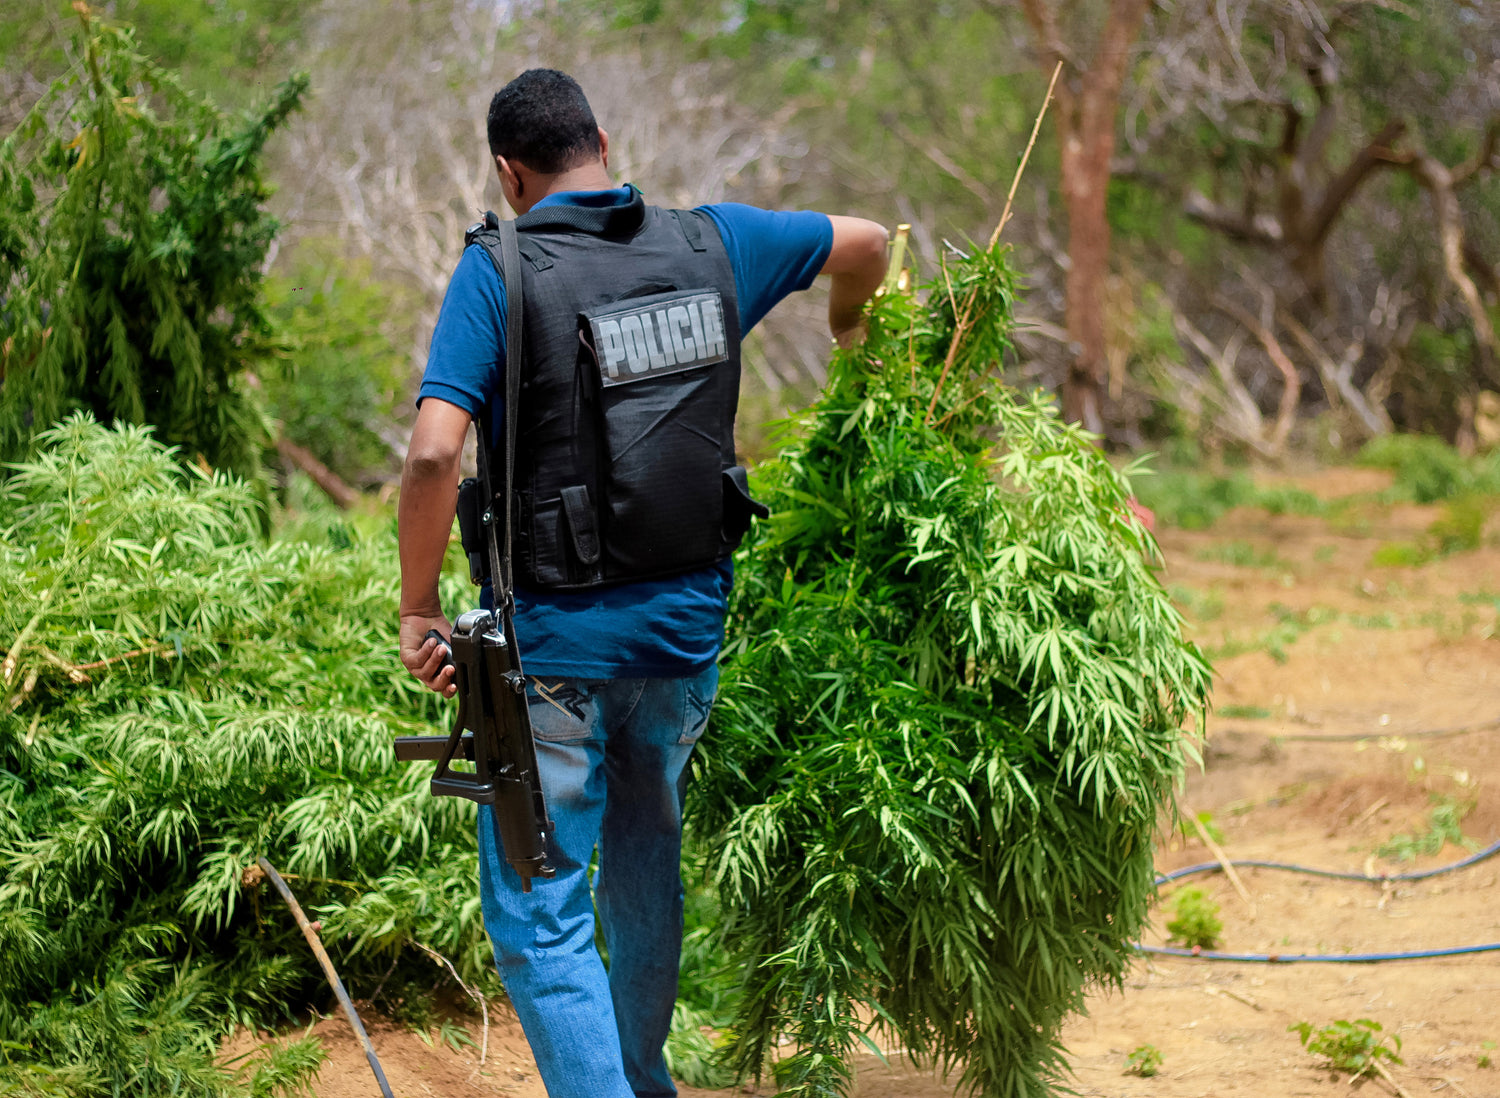 $1 Billion Worth Of Illegal Cannabis Seized In California Over The Past Year, Regulators Confirm